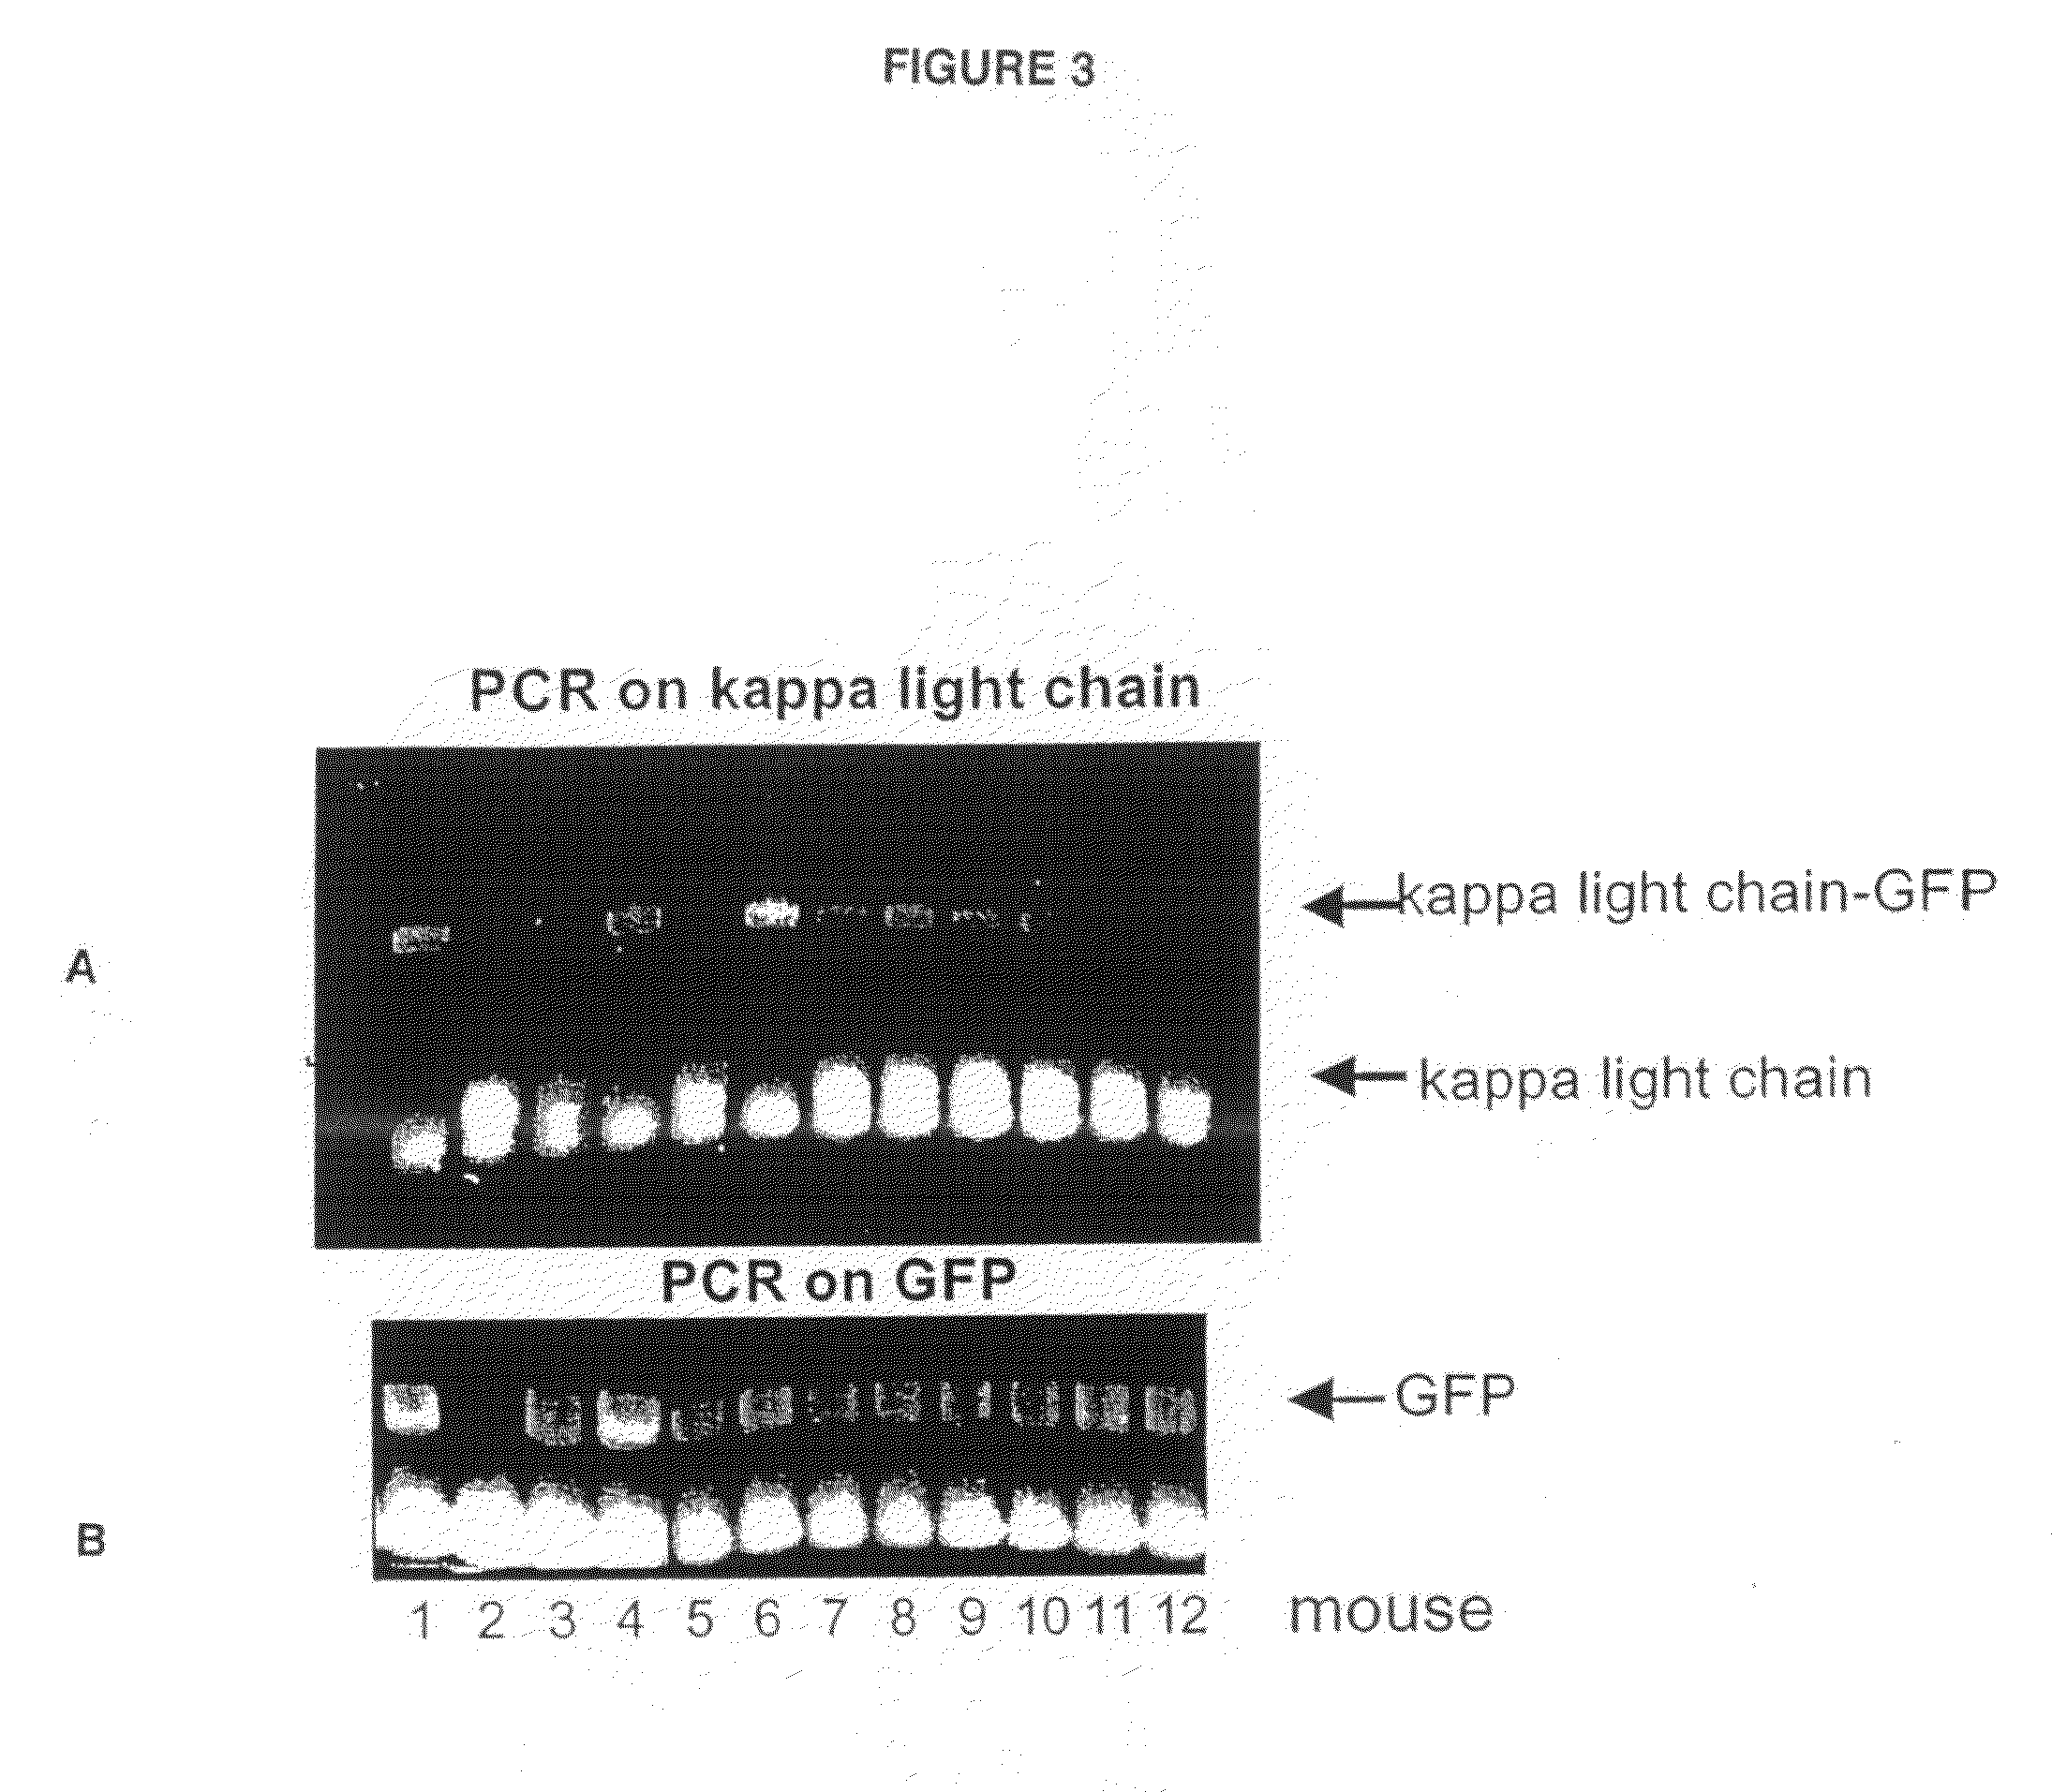 Animals, cells and methods for production of detectably-labeled antibodies